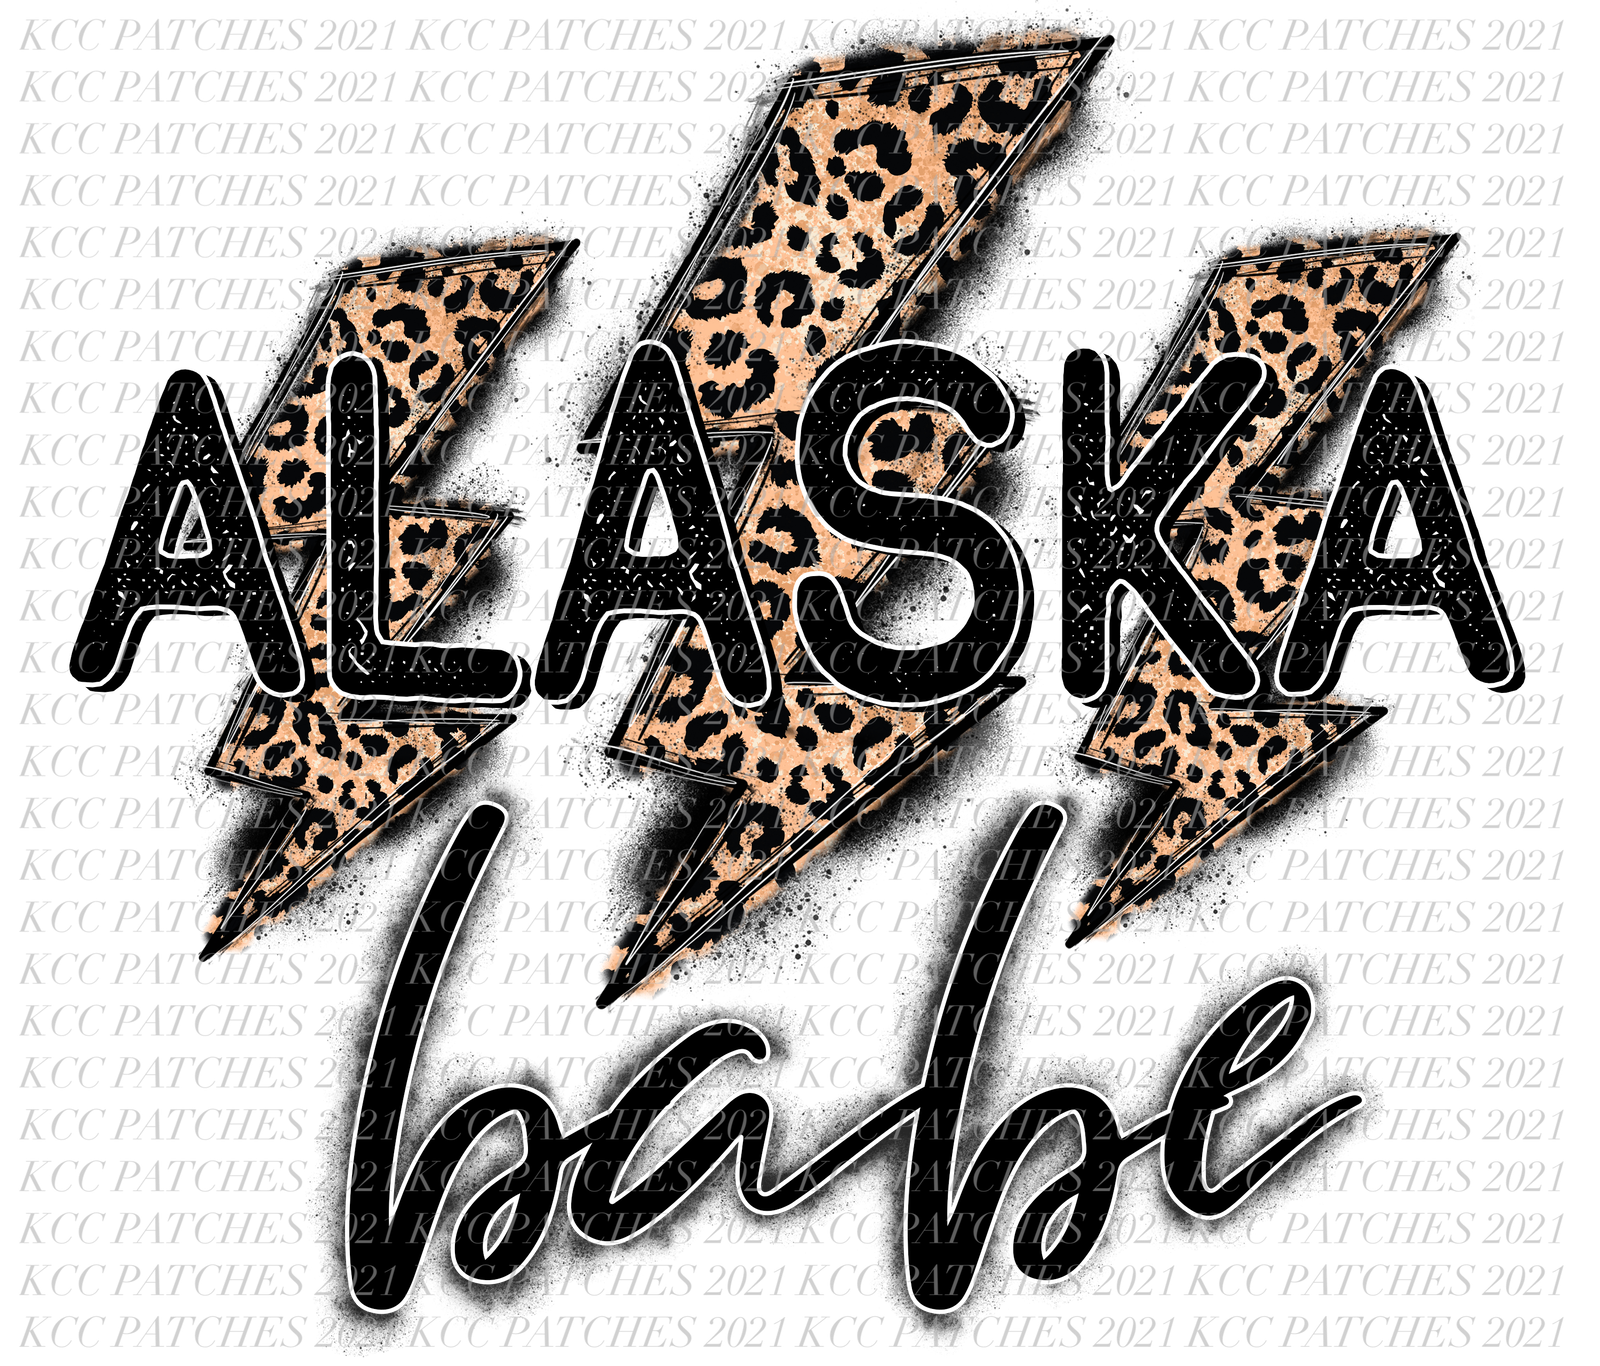 Alaska Babe (All 50 States Available)